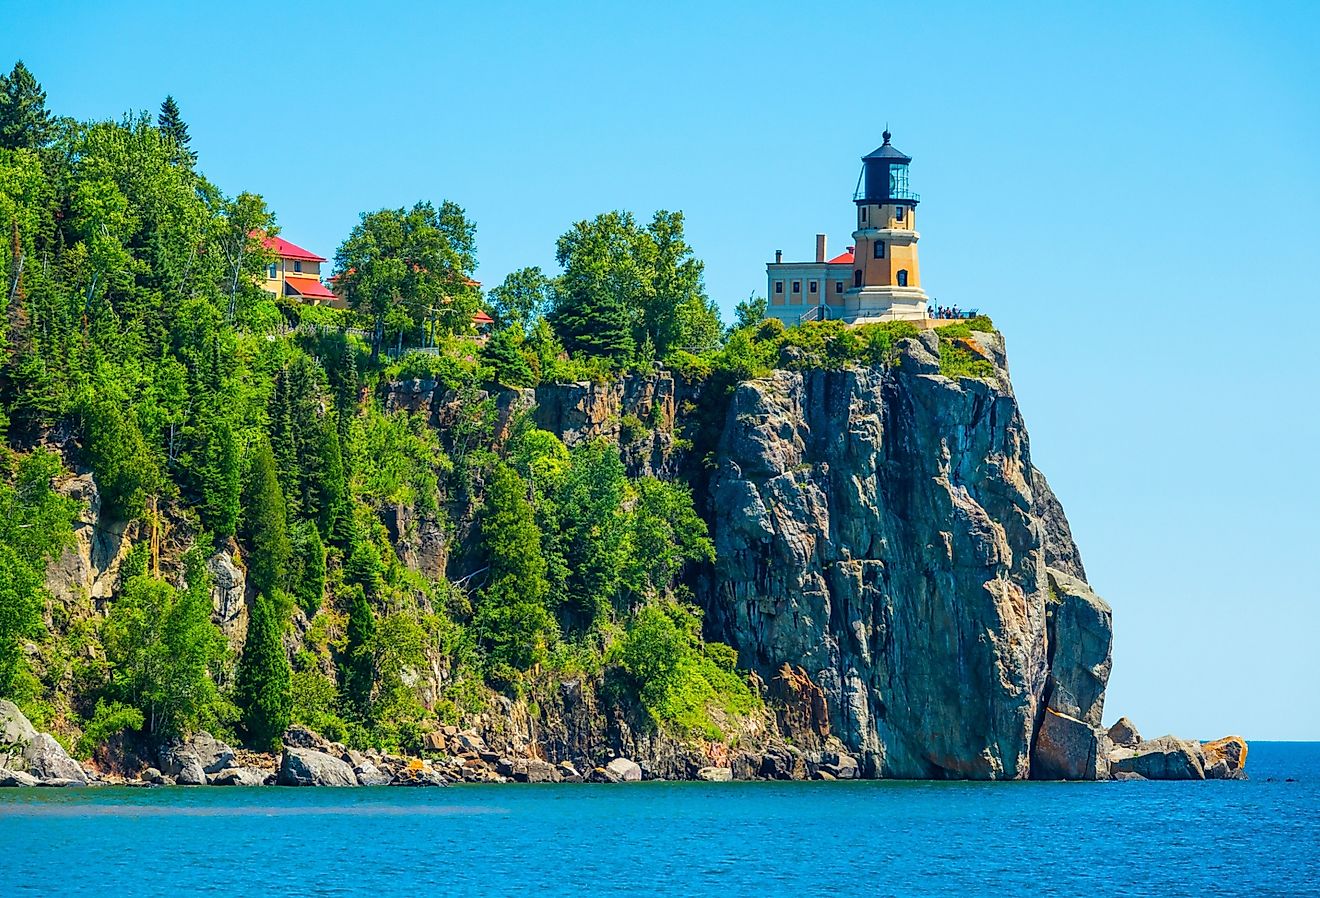 View of Split Rock Lighthouse is a lighthouse located southwest of Silver Bay, Minnesota. Image credit Dennis MacDonald via Shutterstock.